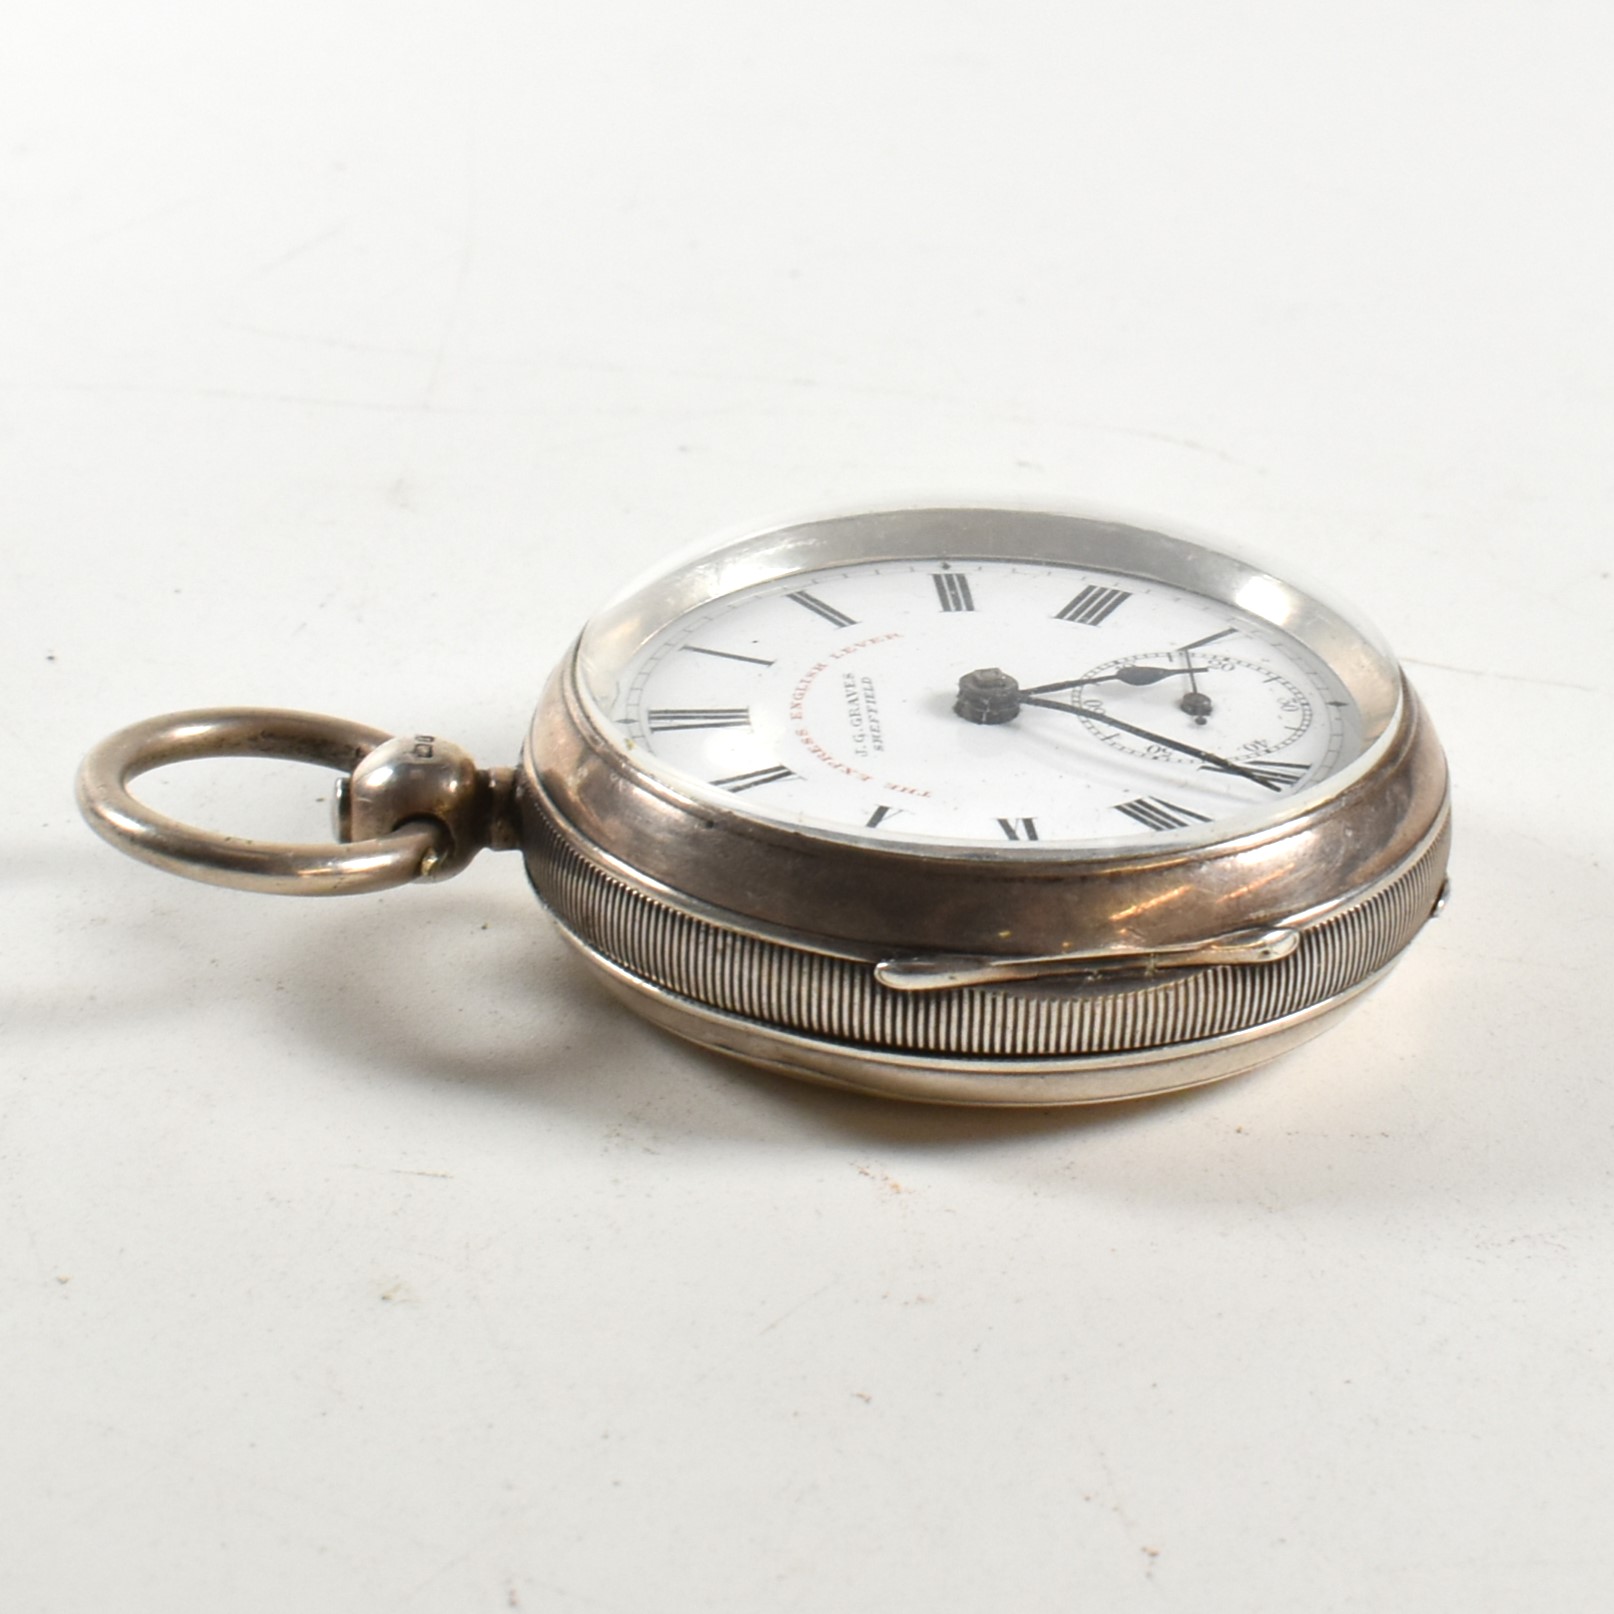 SILVER HALLMARKED JG GRAVES OPEN FACED POCKET WATCH - Image 6 of 8